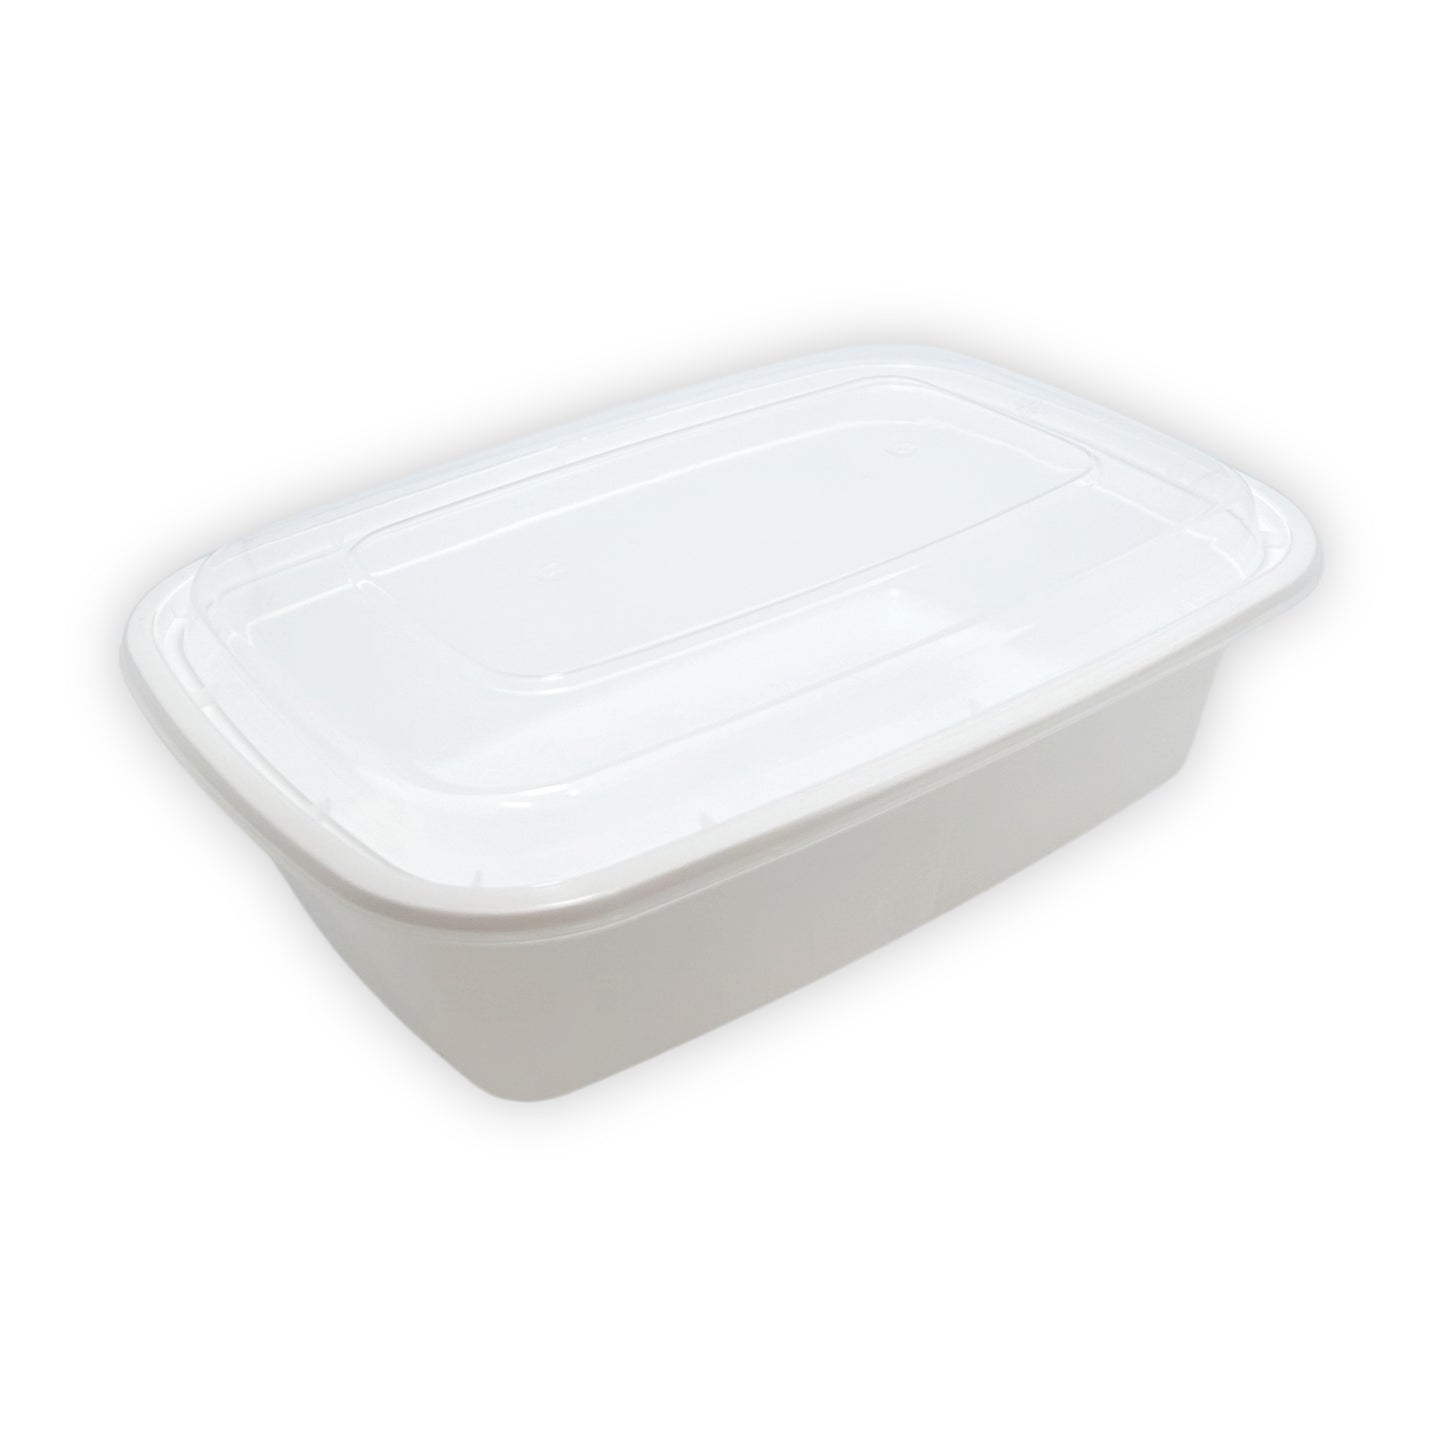 KIS-KY32G | 150sets 32oz, 946ml White PP Rectangle Container with Clear Lids Combo; $0.258/set